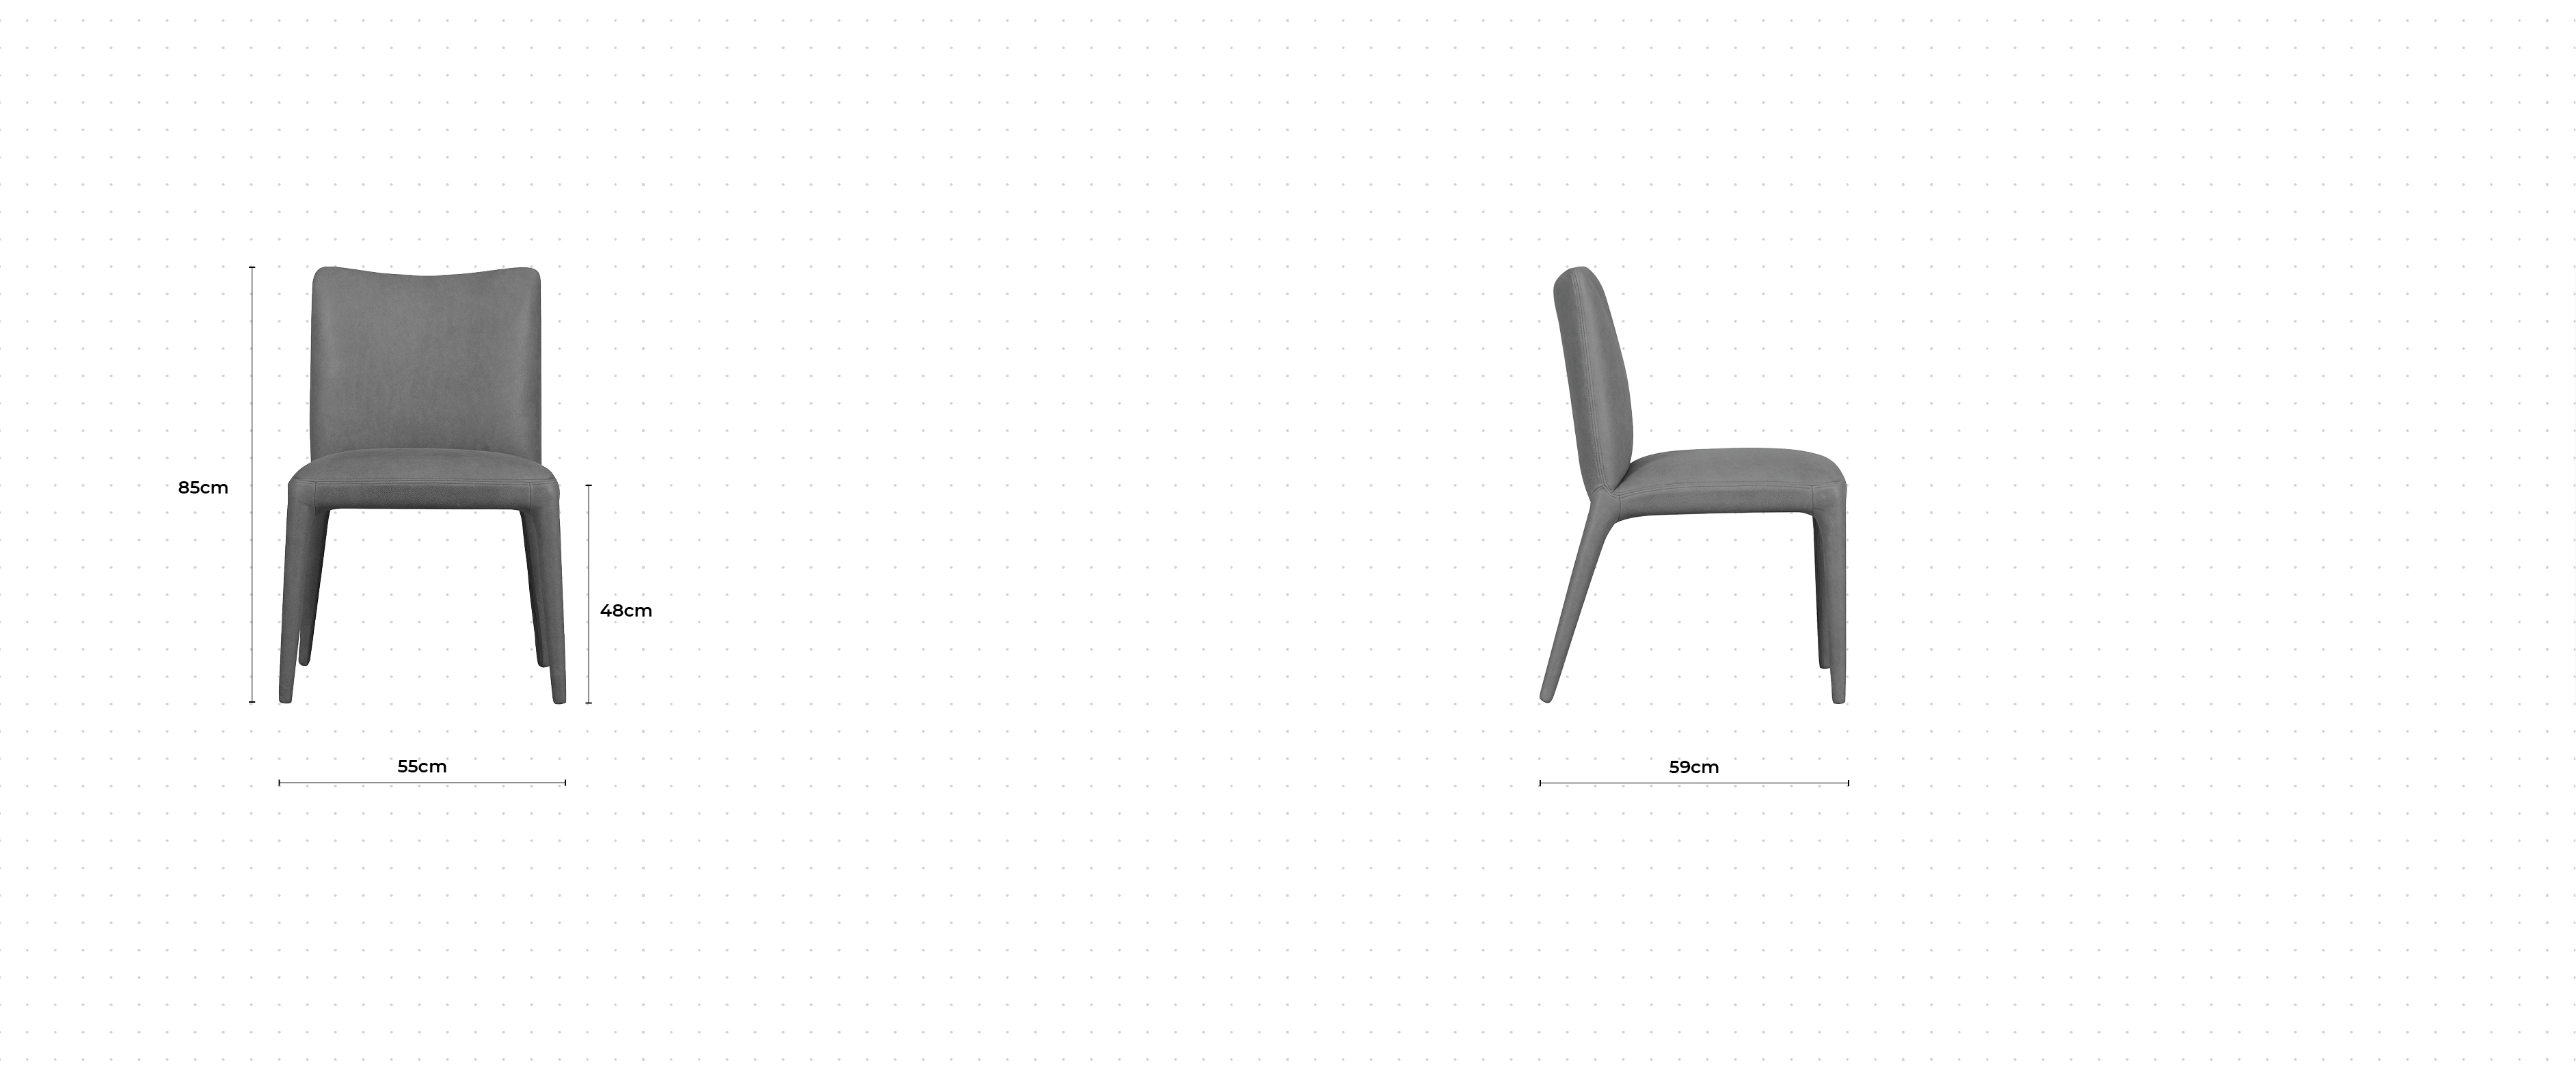 Monza Dining Chair dimensions